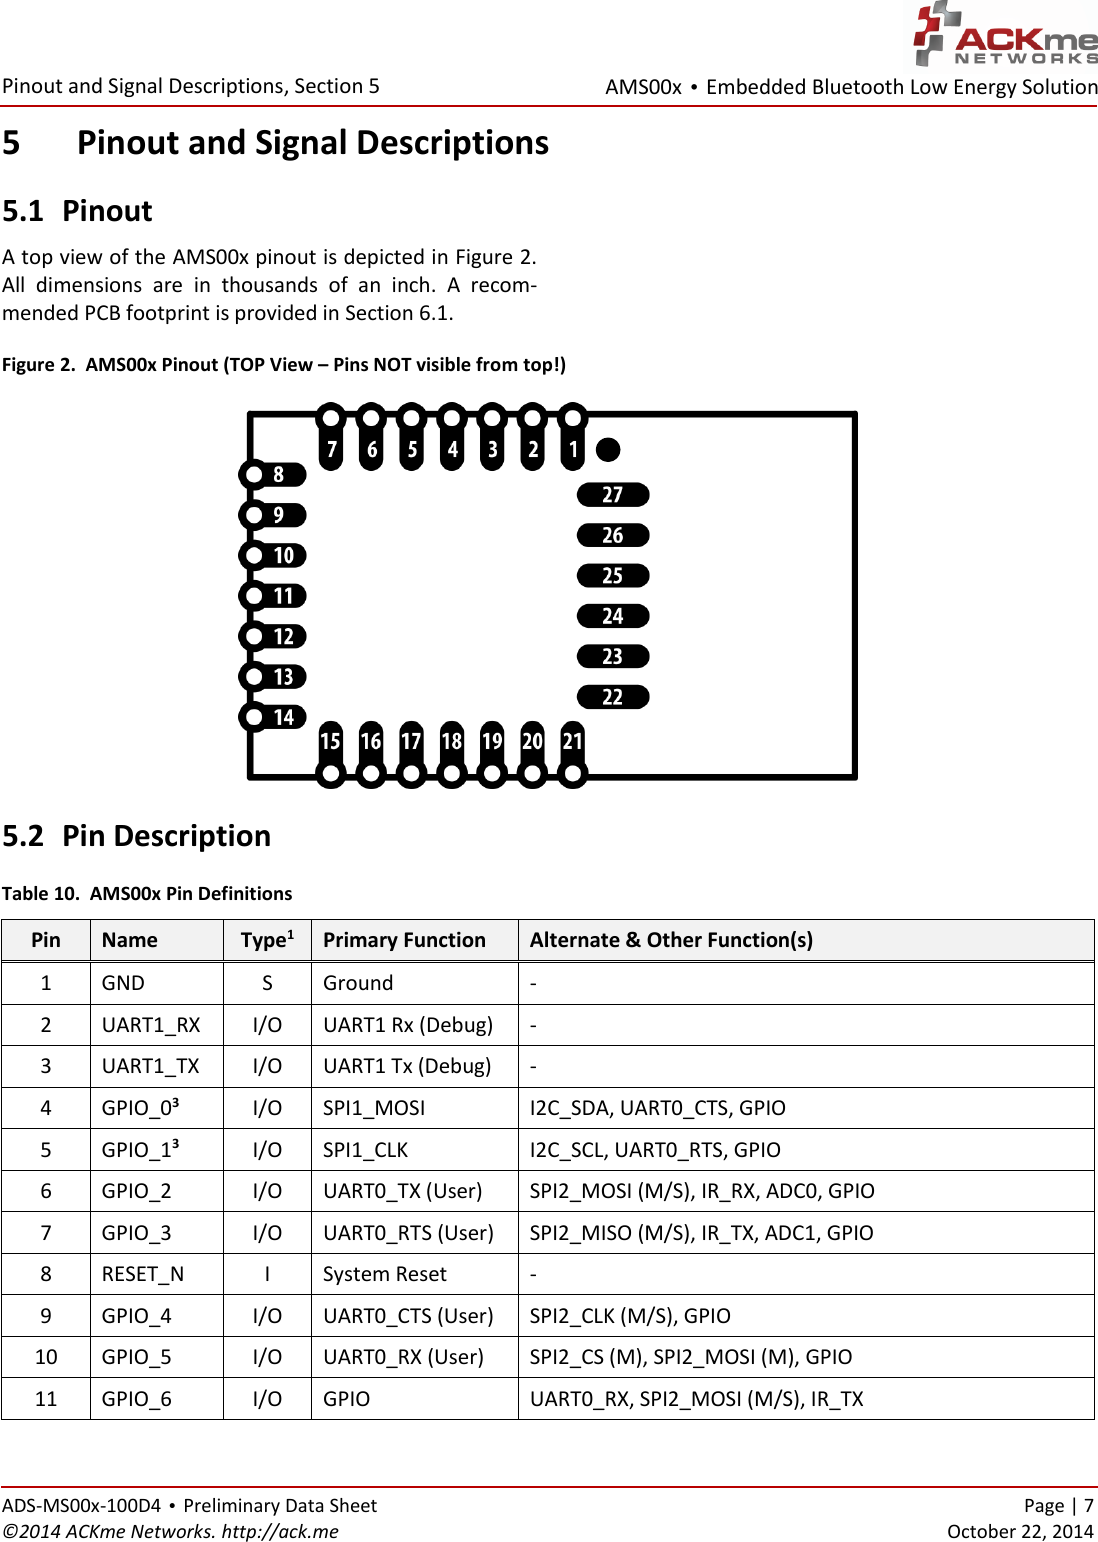 AMS00x • Embedded Bluetooth Low Energy Solution  Pinout and Signal Descriptions, Section 5 ADS-MS00x-100D4 • Preliminary Data Sheet    Page | 7 ©2014 ACKme Networks. http://ack.me    October 22, 2014 5 Pinout and Signal Descriptions 5.1 Pinout A top view of the AMS00x pinout is depicted in Figure 2. All  dimensions  are  in  thousands  of  an  inch.  A  recom-mended PCB footprint is provided in Section 6.1. Figure 2.  AMS00x Pinout (TOP View – Pins NOT visible from top!)  5.2 Pin Description Table 10.  AMS00x Pin Definitions Pin Name Type1 Primary Function  Alternate &amp; Other Function(s) 1 GND S Ground - 2 UART1_RX I/O UART1 Rx (Debug) - 3 UART1_TX I/O UART1 Tx (Debug) - 4 GPIO_03 I/O SPI1_MOSI I2C_SDA, UART0_CTS, GPIO 5 GPIO_13 I/O SPI1_CLK I2C_SCL, UART0_RTS, GPIO 6 GPIO_2  I/O UART0_TX (User) SPI2_MOSI (M/S), IR_RX, ADC0, GPIO 7 GPIO_3 I/O UART0_RTS (User) SPI2_MISO (M/S), IR_TX, ADC1, GPIO 8 RESET_N I System Reset - 9 GPIO_4 I/O UART0_CTS (User) SPI2_CLK (M/S), GPIO 10 GPIO_5 I/O UART0_RX (User) SPI2_CS (M), SPI2_MOSI (M), GPIO 11 GPIO_6 I/O GPIO UART0_RX, SPI2_MOSI (M/S), IR_TX 